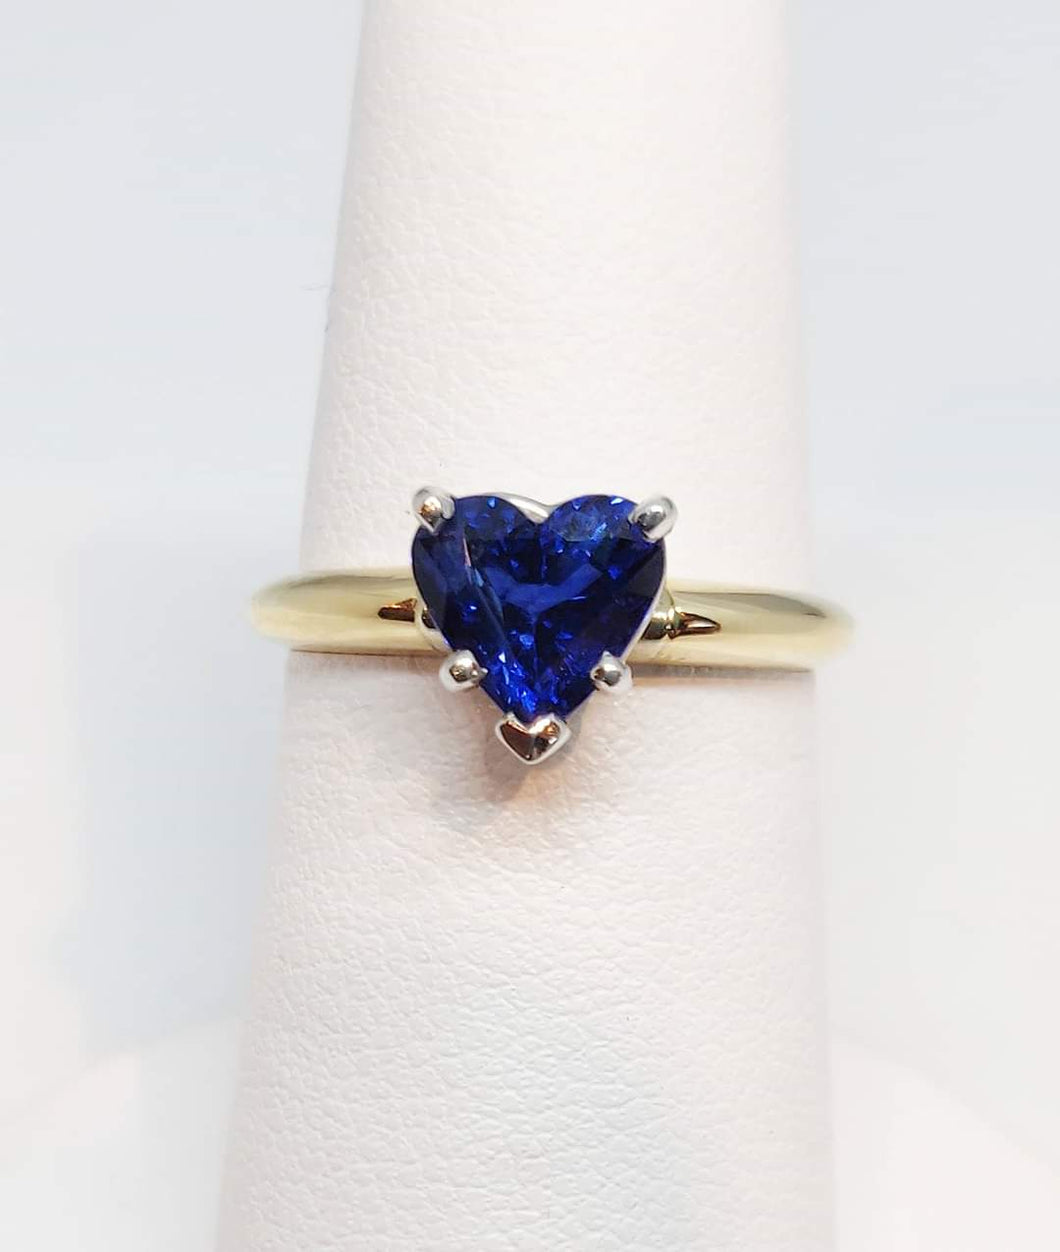 Blue topaz heart shaped solitaire ring